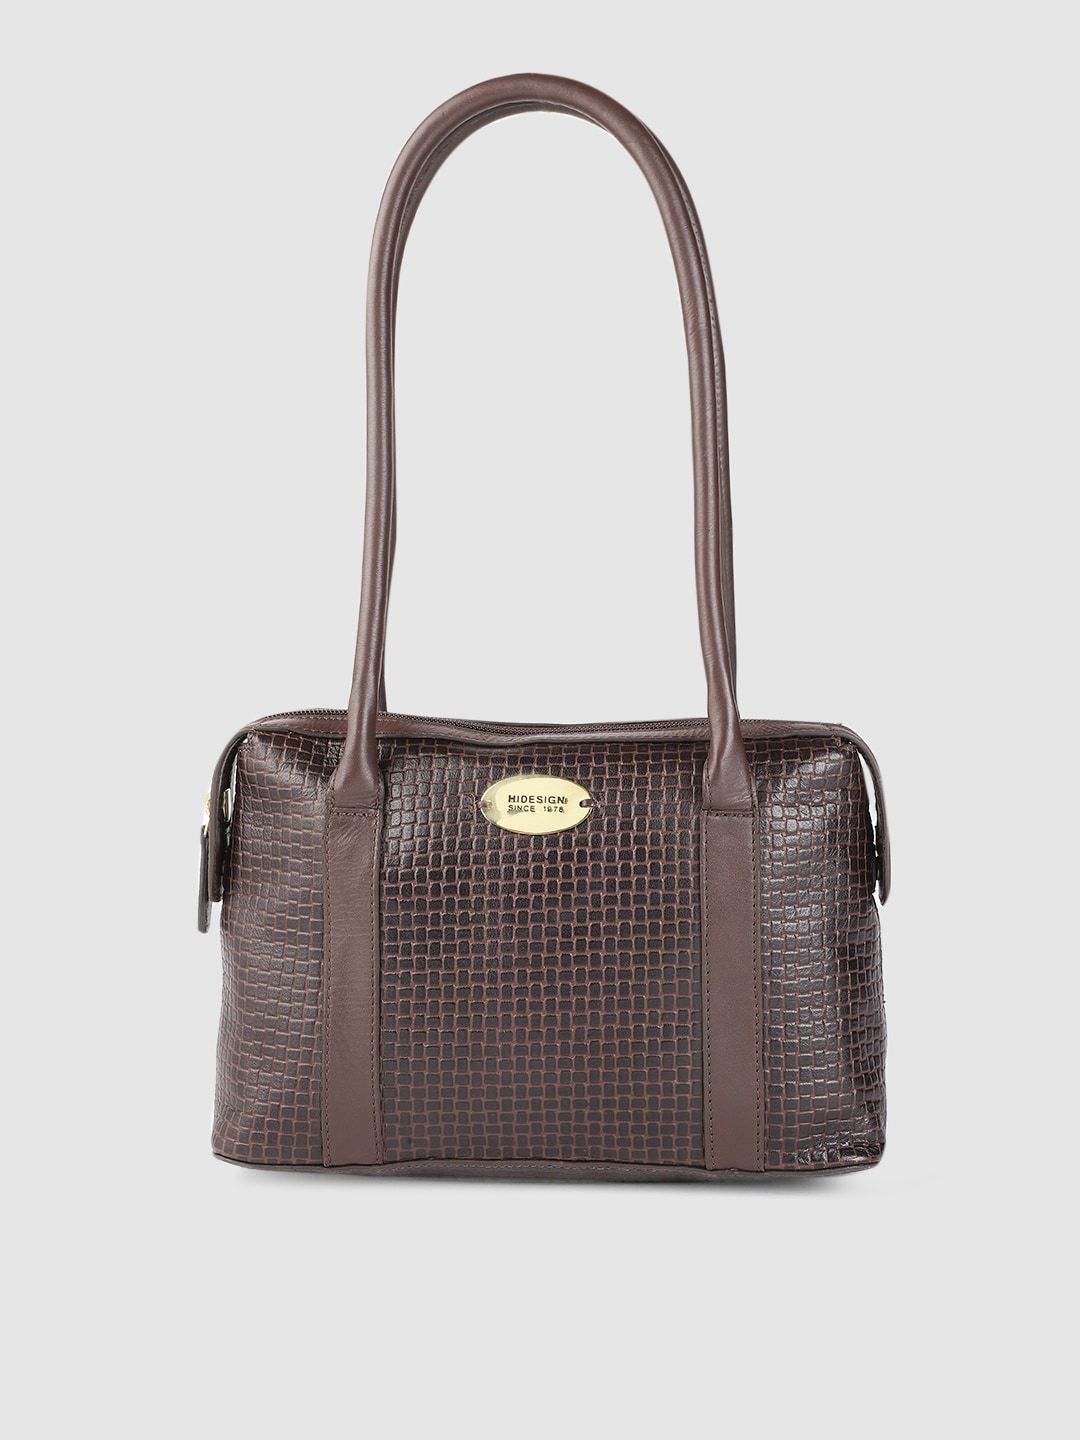 Hidesign Brown Textured Leather Shoulder Bag Price in India